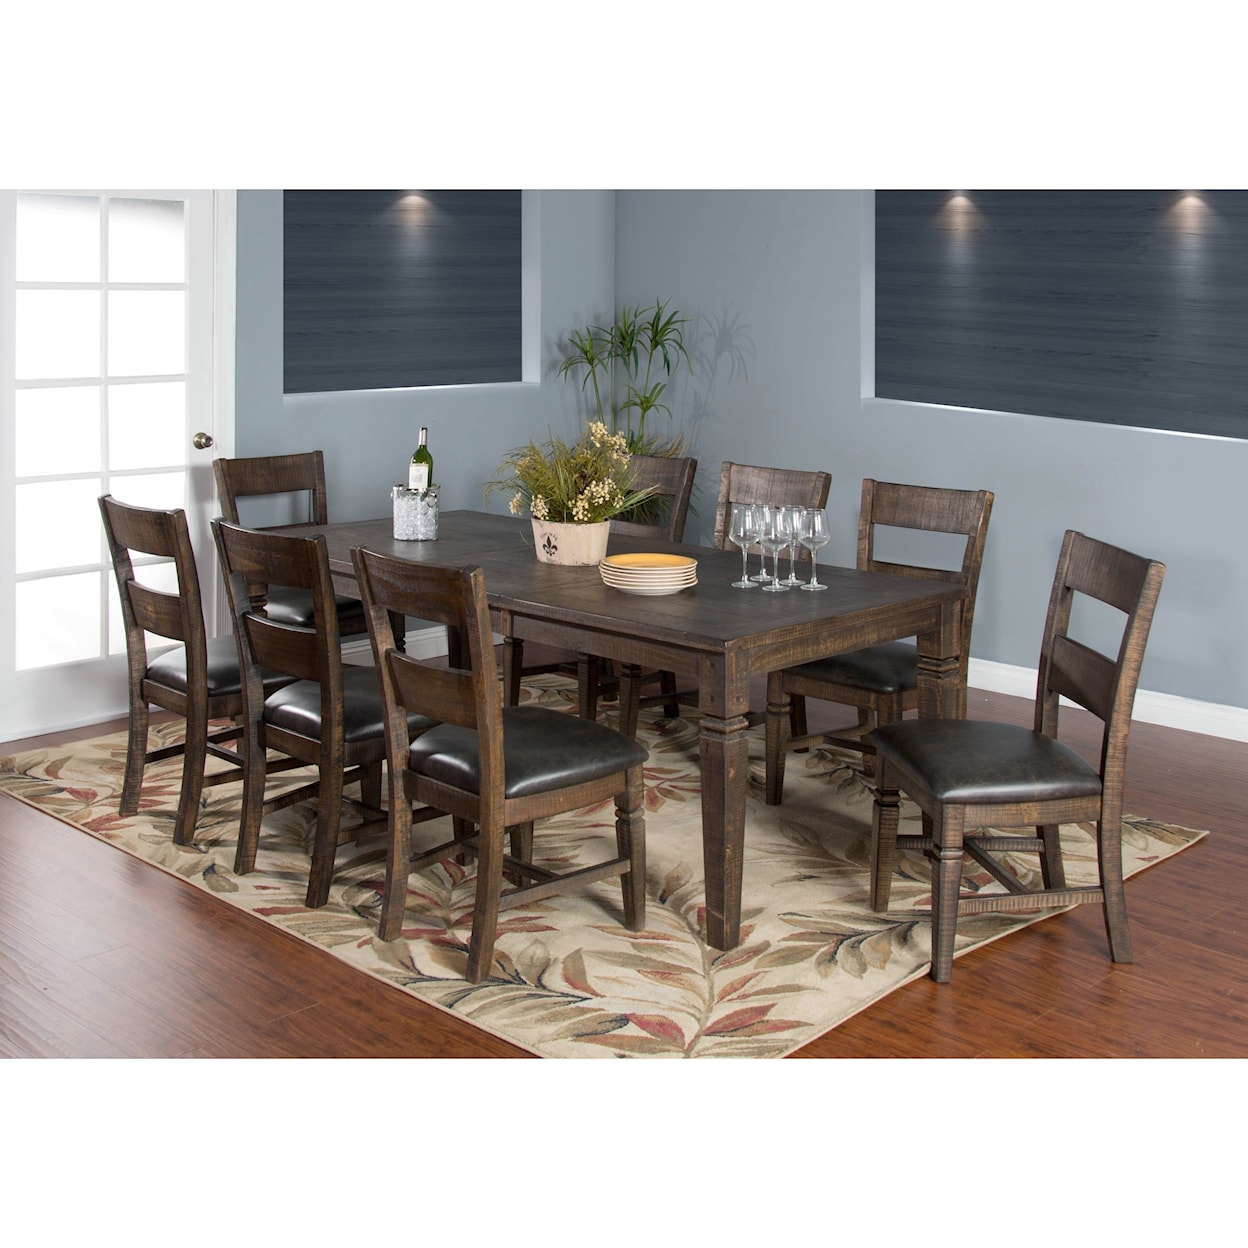 Sunny Designs Homestead Dining Table Set for Eight